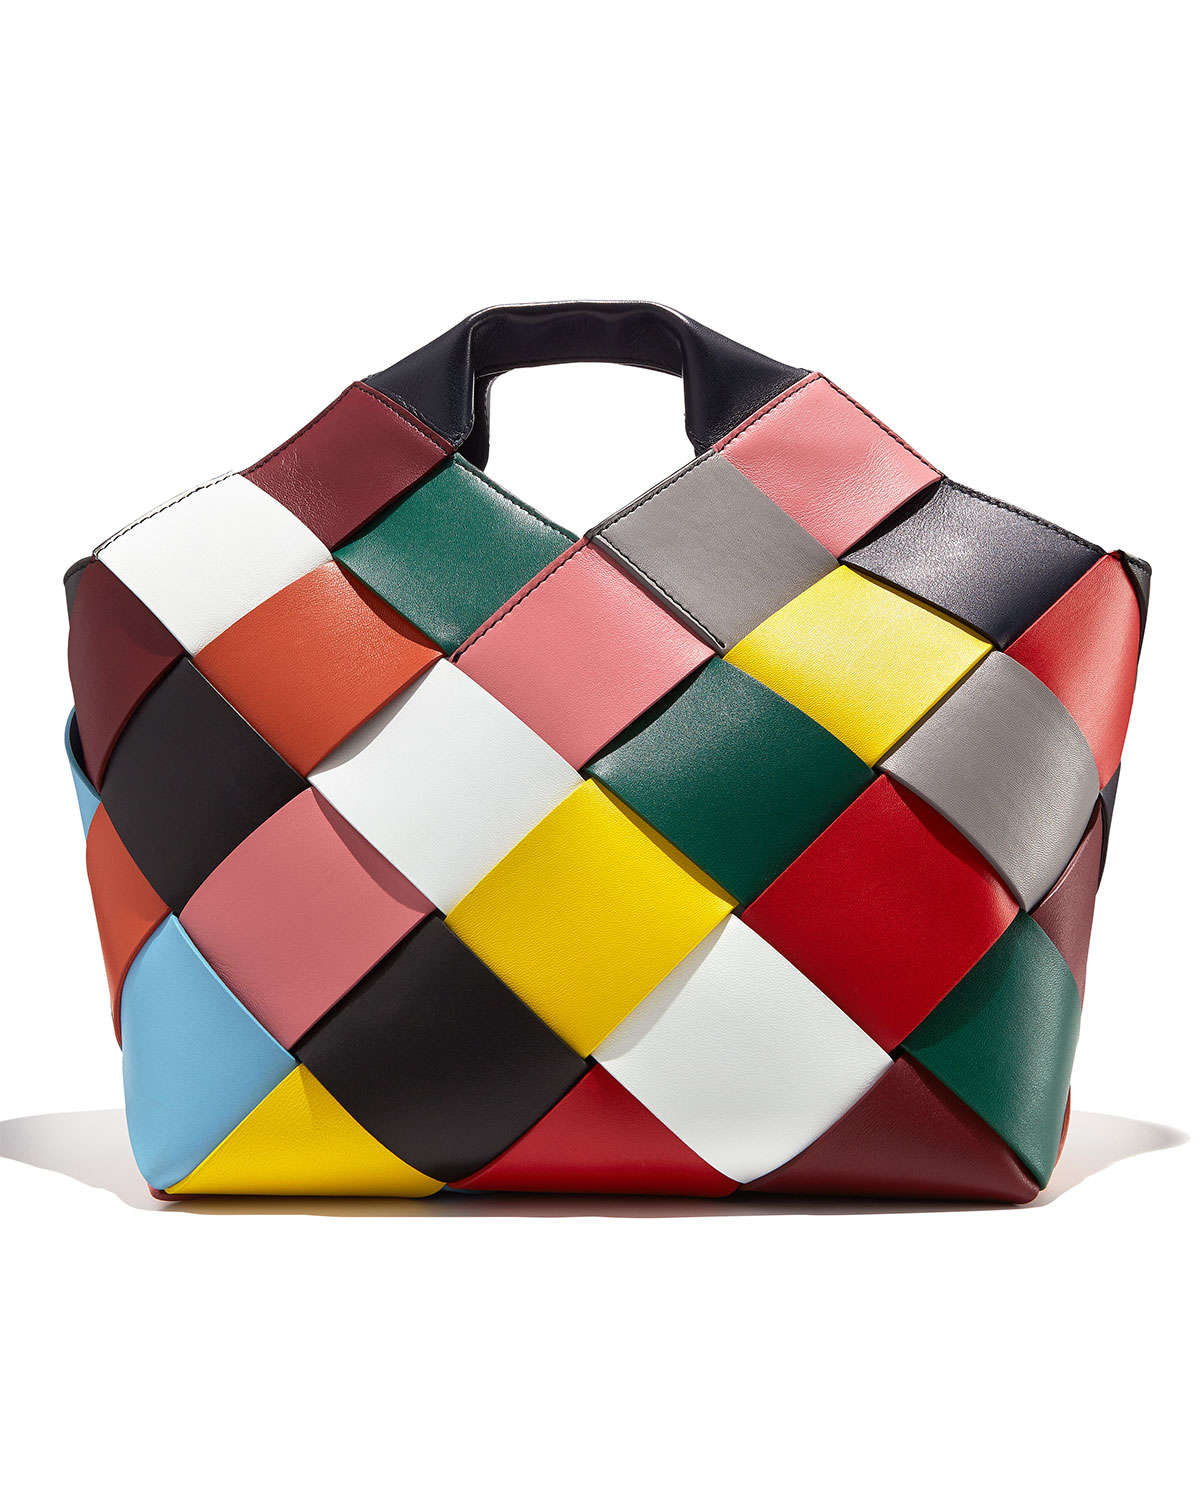 Lyst - Loewe Small Woven Leather Tote Bag